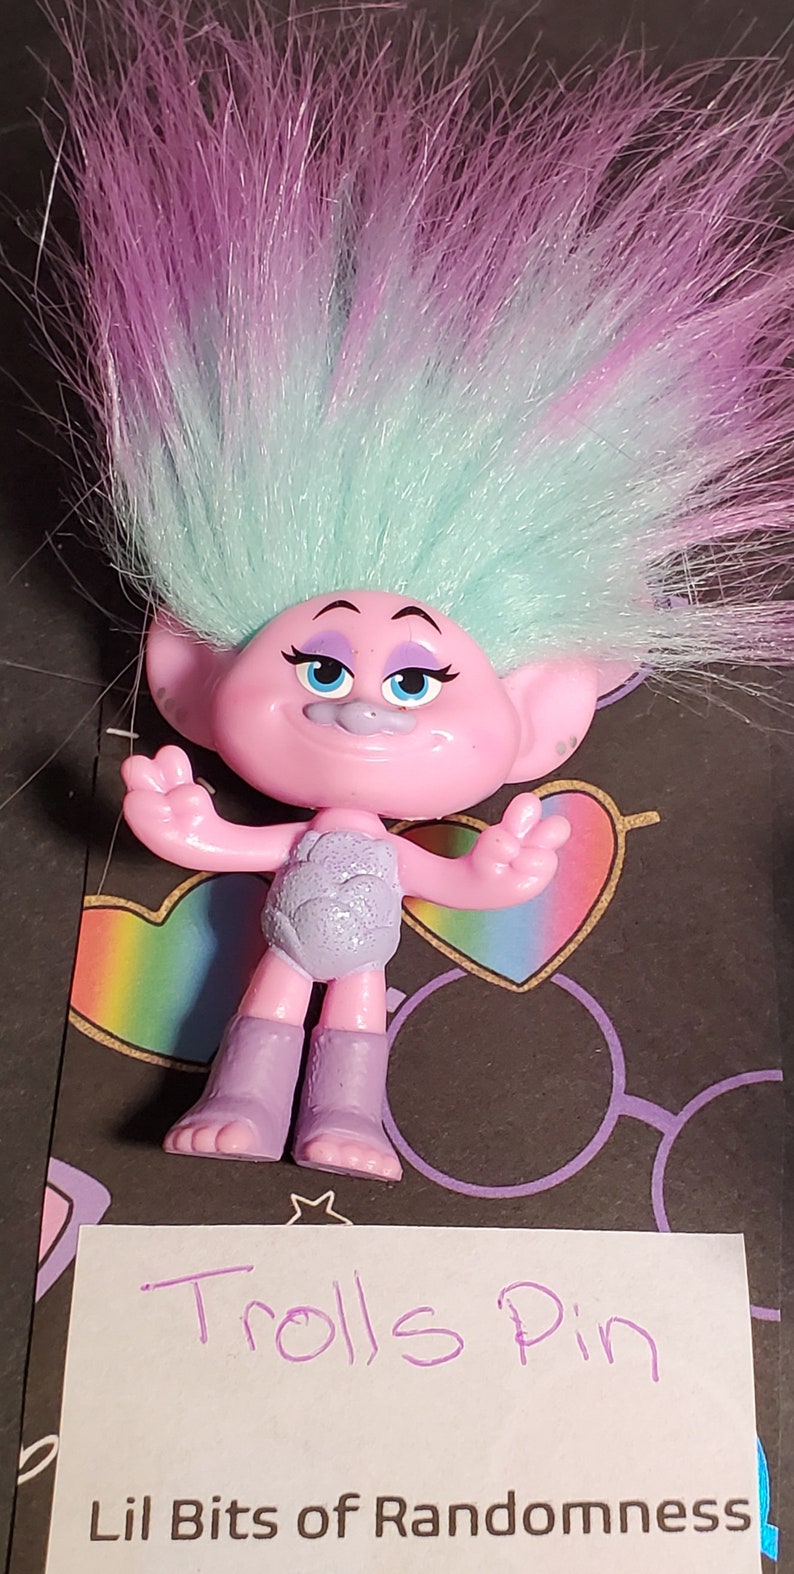 Trolls Upcycled Troll Doll Earrings, Rings, Pin FREE SHIPPING Kidcore Toycore Bubble Kid Goth Pop Play Toy Kandi Rave Festival Aesthetic Satin Troll Pin